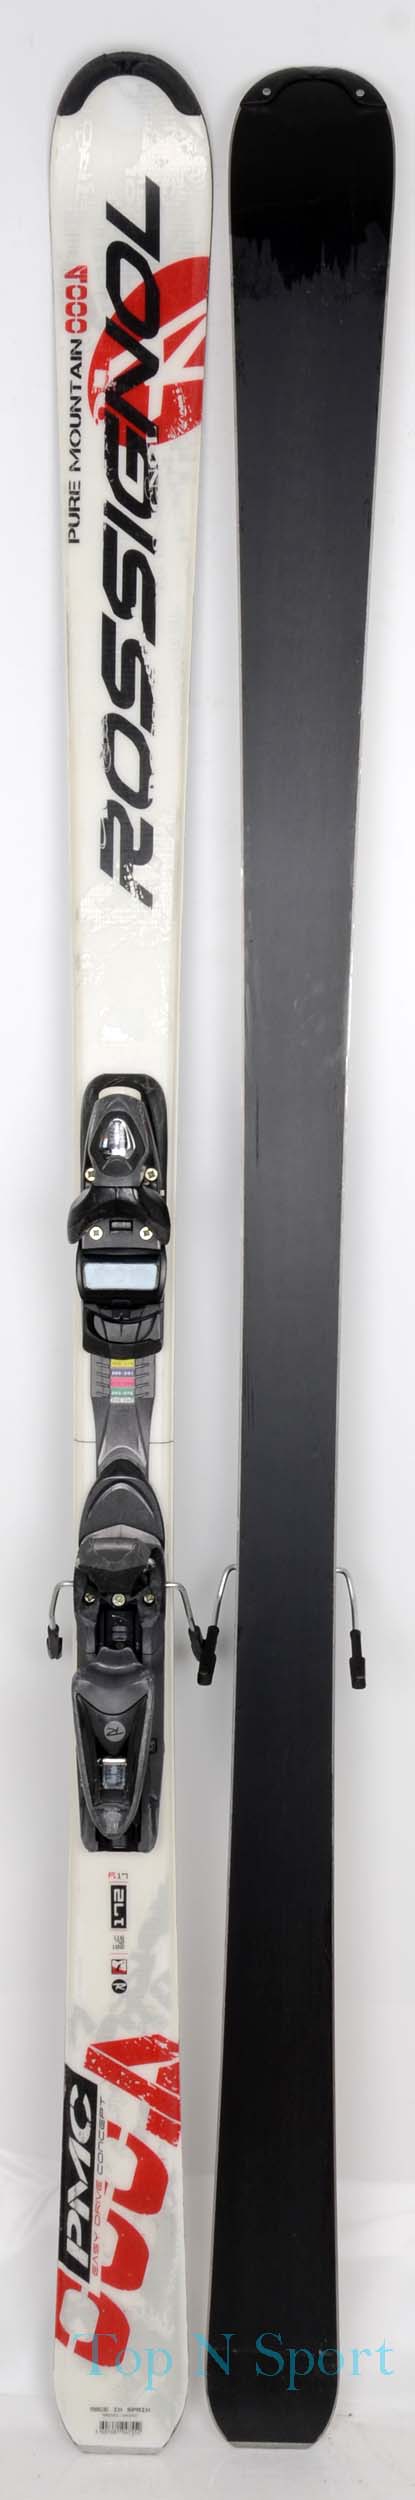 Rossignol PMC 4000 - Skis d'occasion